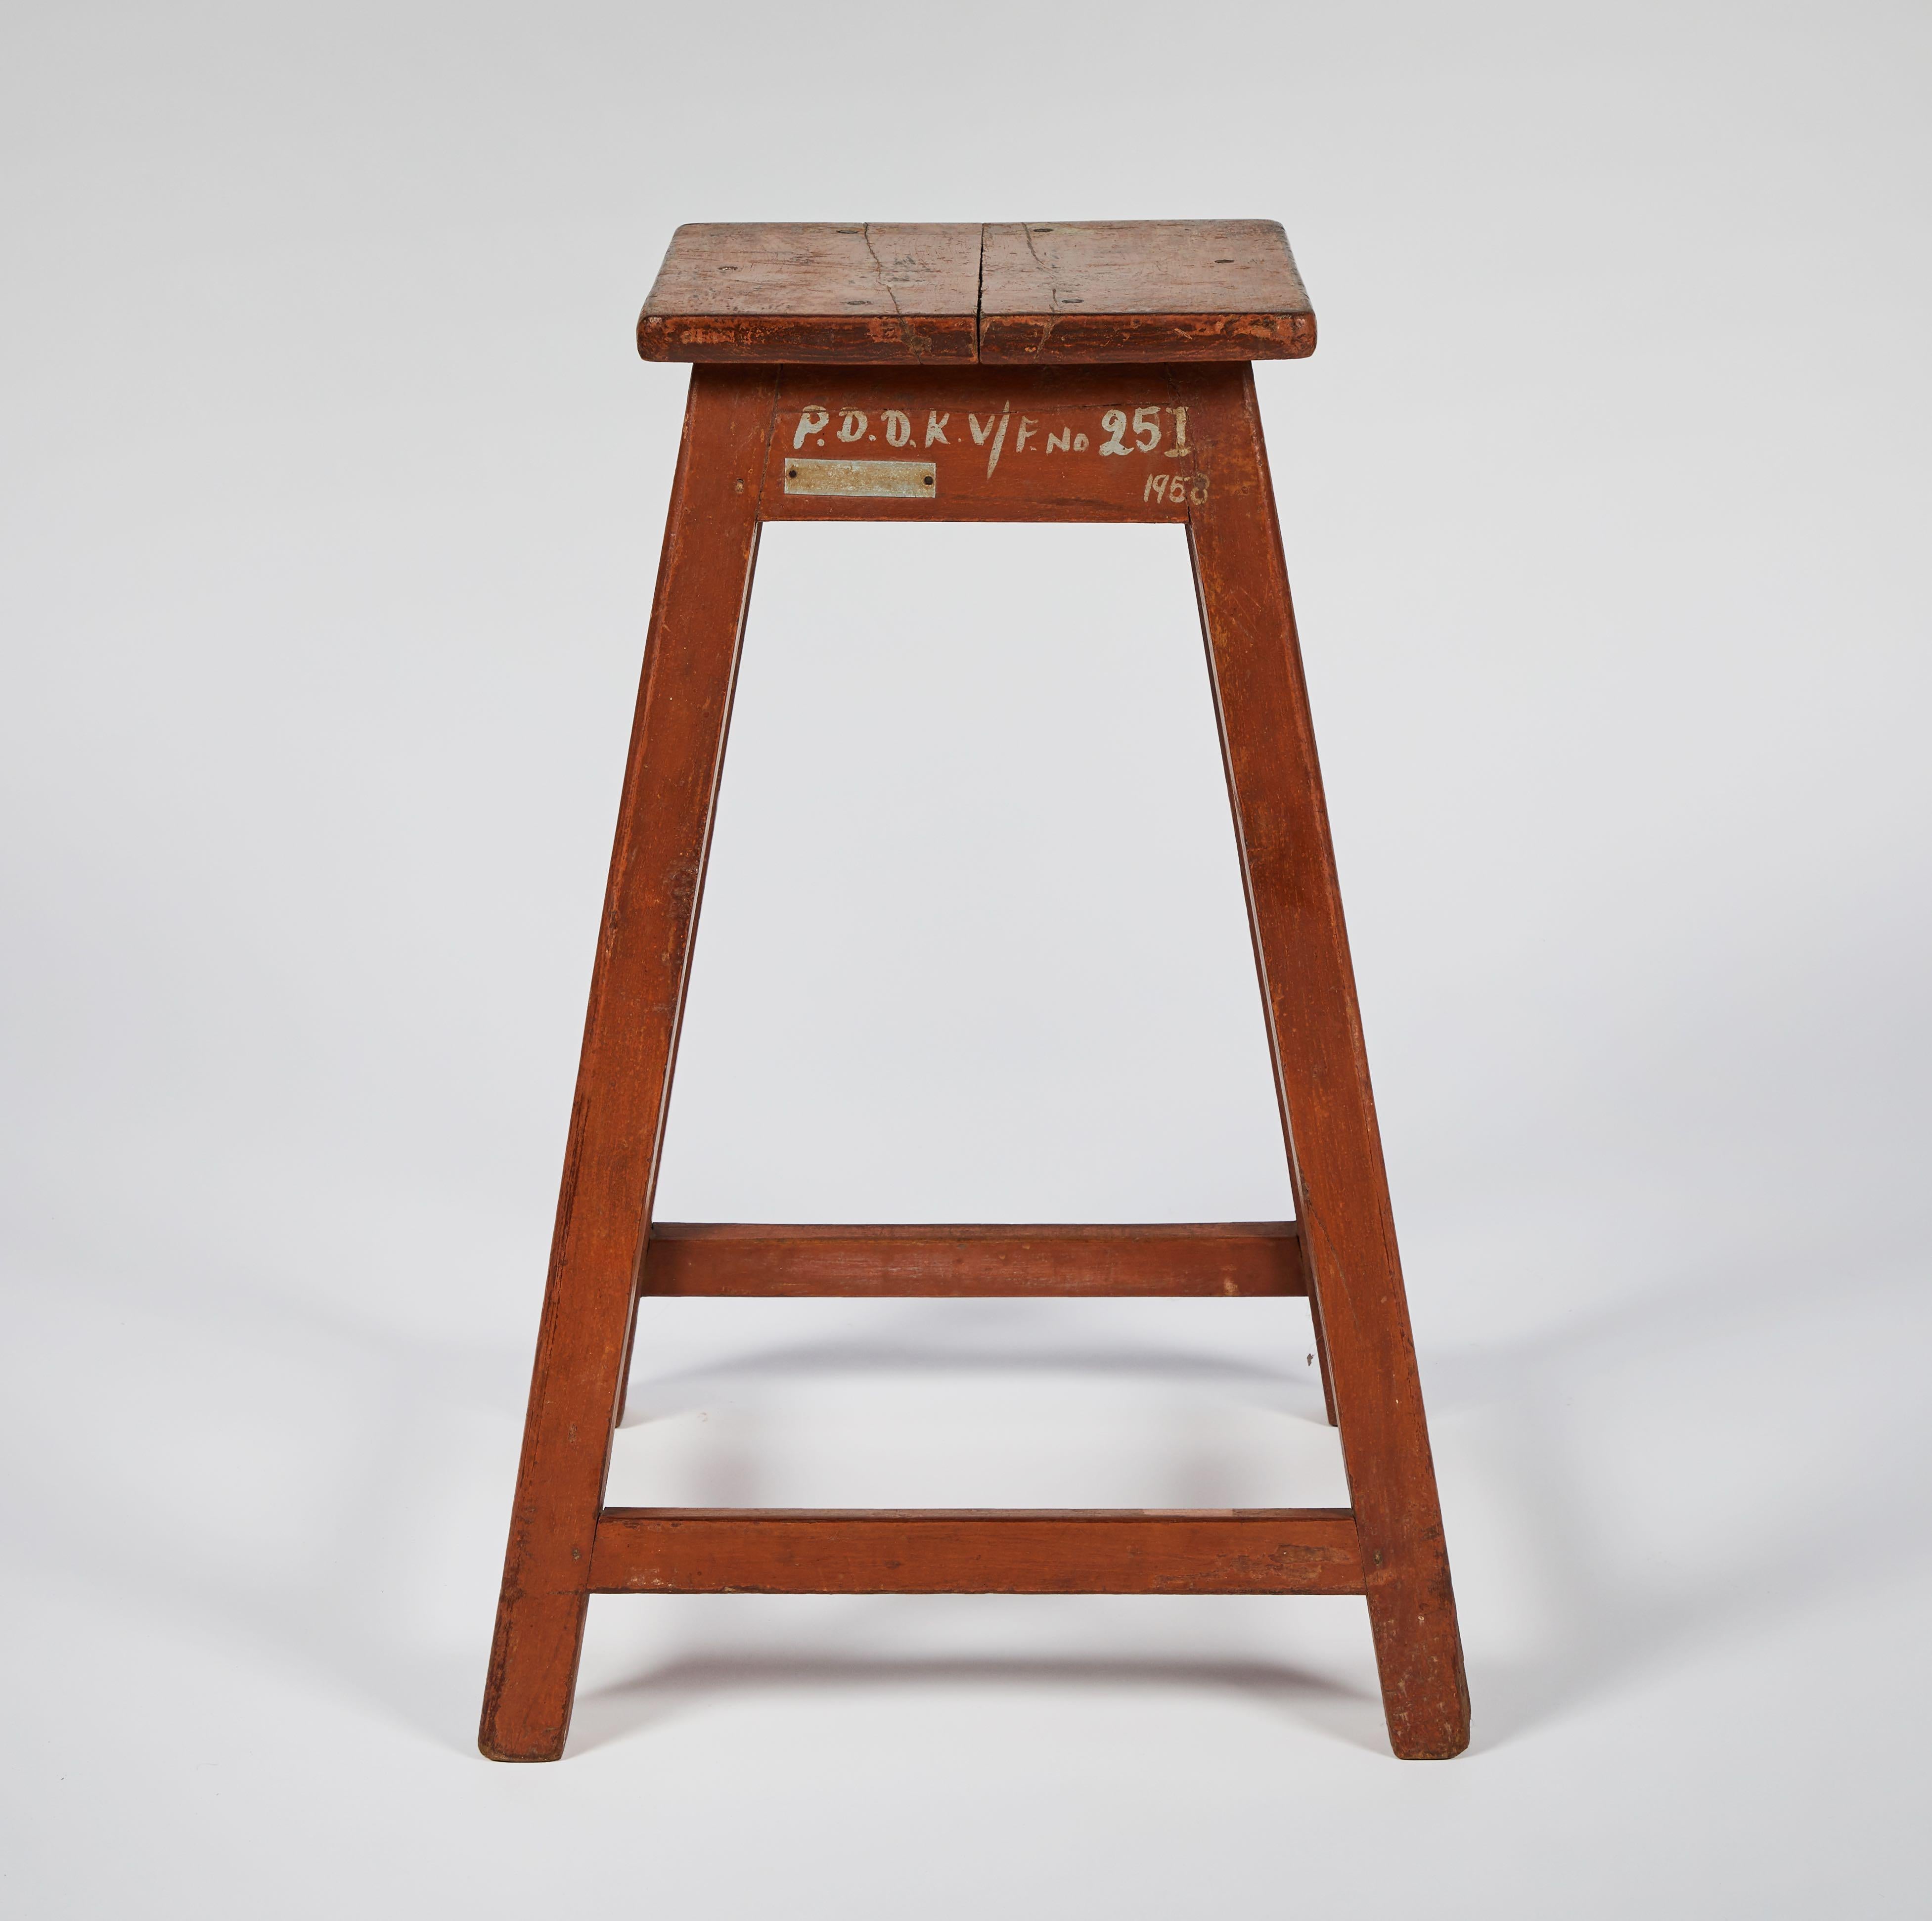 Six wooden factory stools from late 19th-century France. The cheerful red paint has taken on a fantastic patina from age and use. With square seats and block-shaped legs connected on all sides by a stretcher or footrest, these stools have straight,